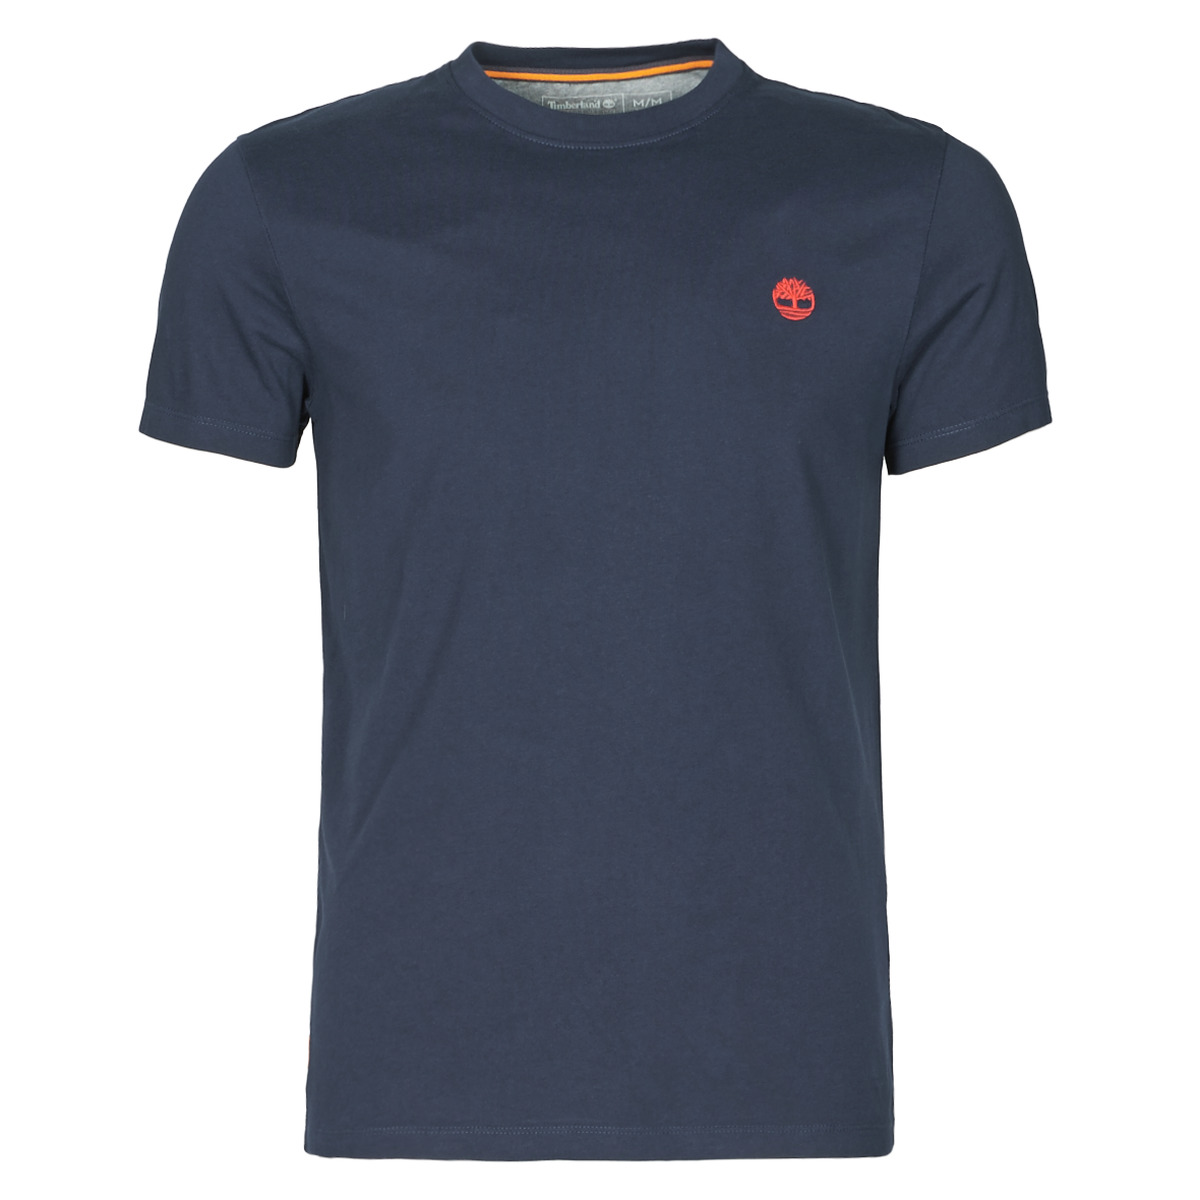 Timberland SS DUNSTAN RIVER POCKET TEE SLIM Marine - Fast delivery |  Spartoo Europe ! - Clothing short-sleeved t-shirts Men 33,00 €